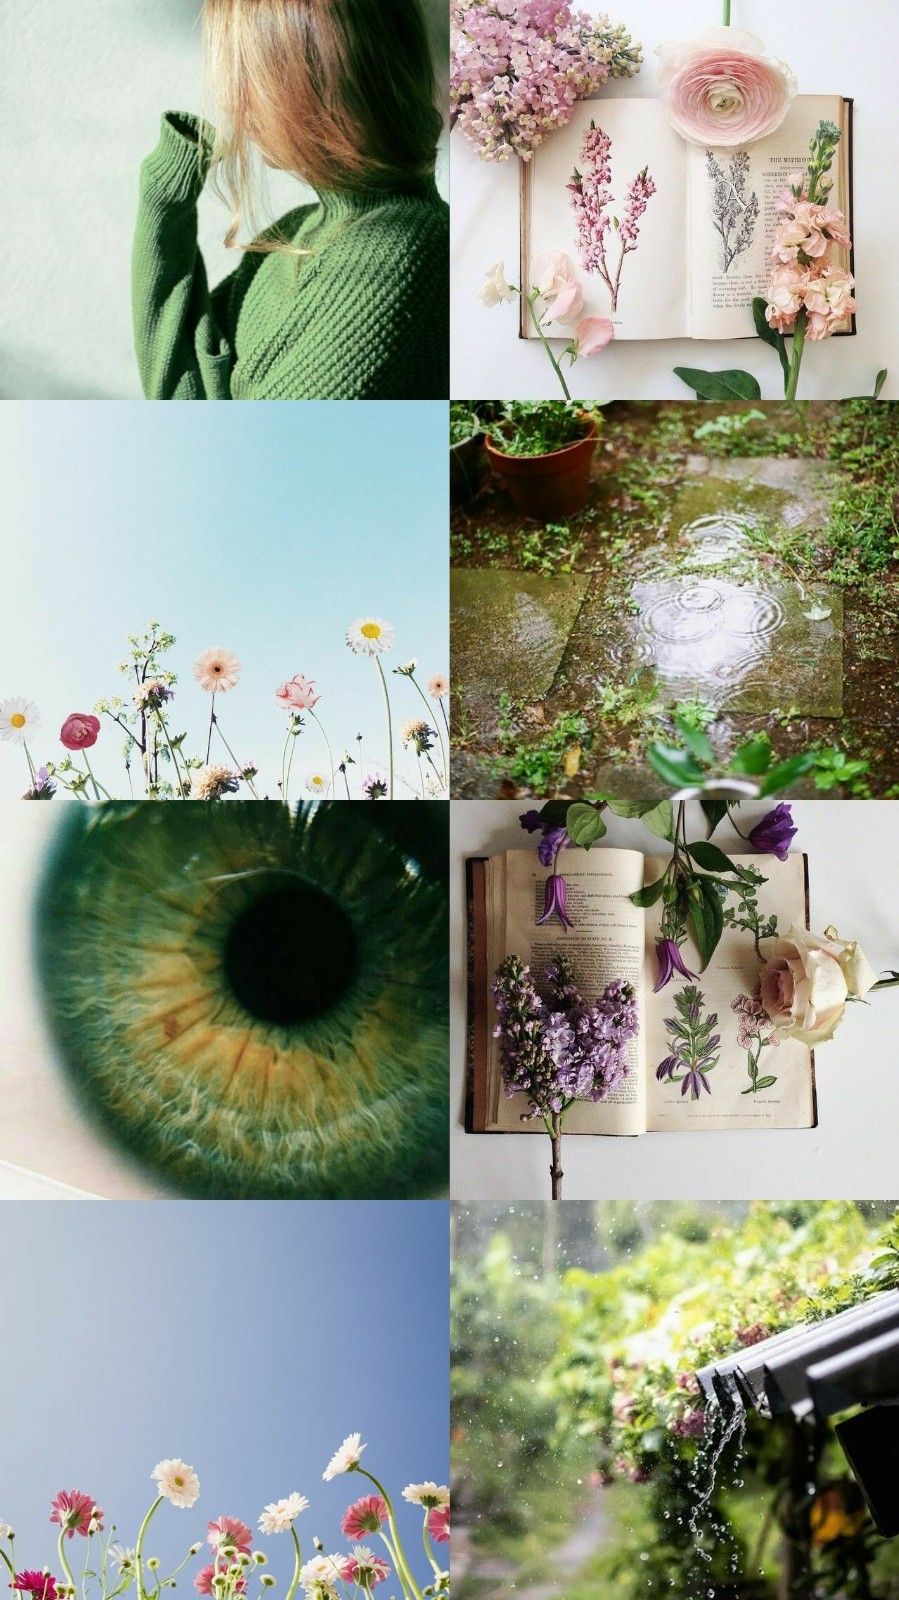 Aesthetic picture of flowers, a book, a green eye, and a girl in a green sweater - Spring